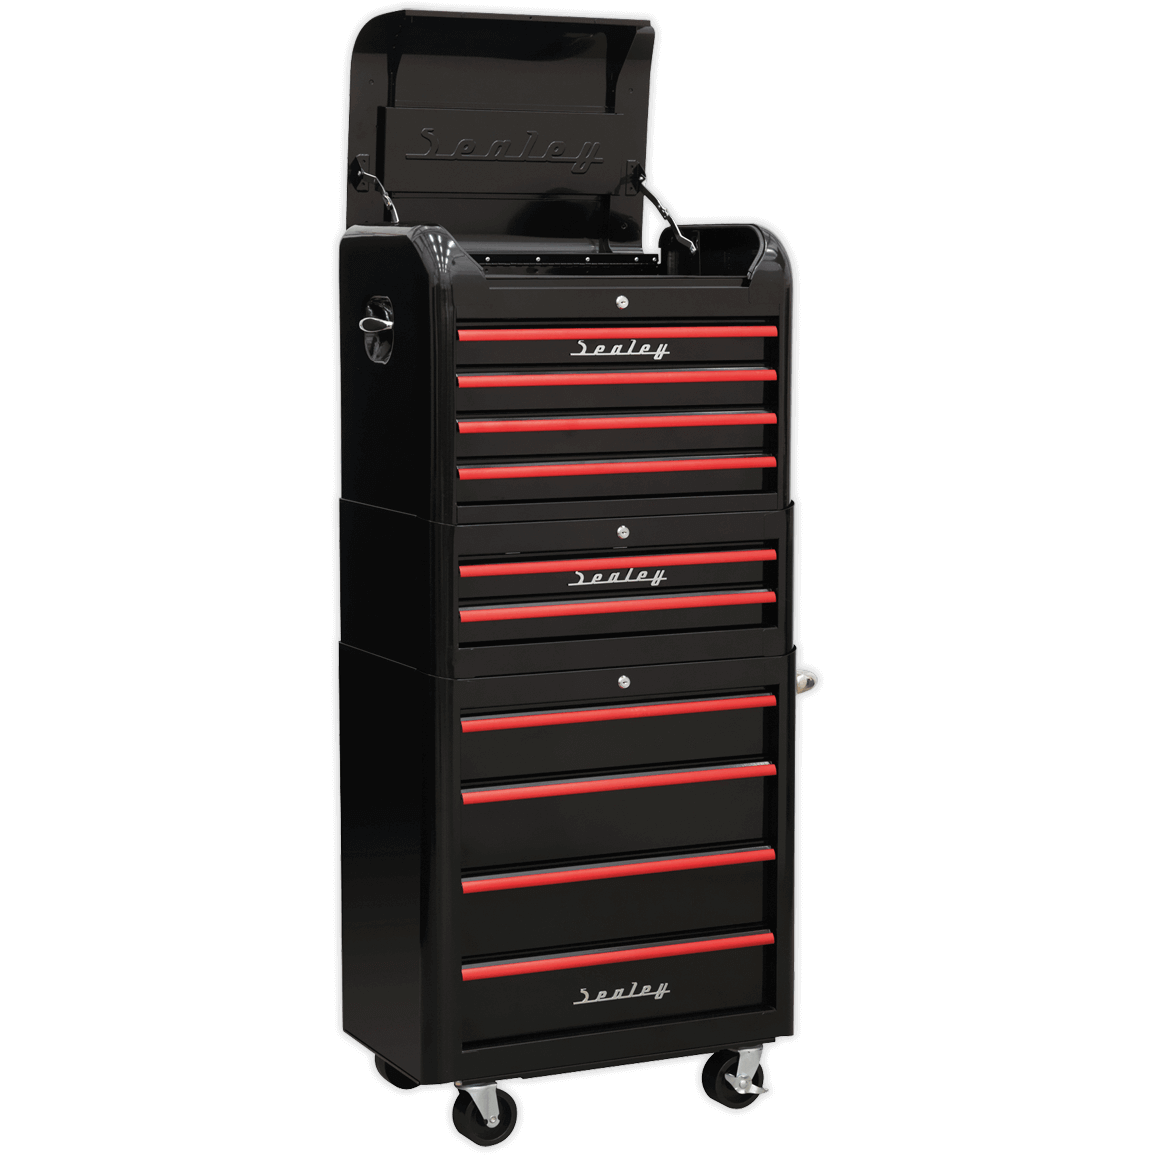 Sealey Premier Retro Style 10 Drawer Roller Cabinet, Mid and Top Tool Chest Black / Red